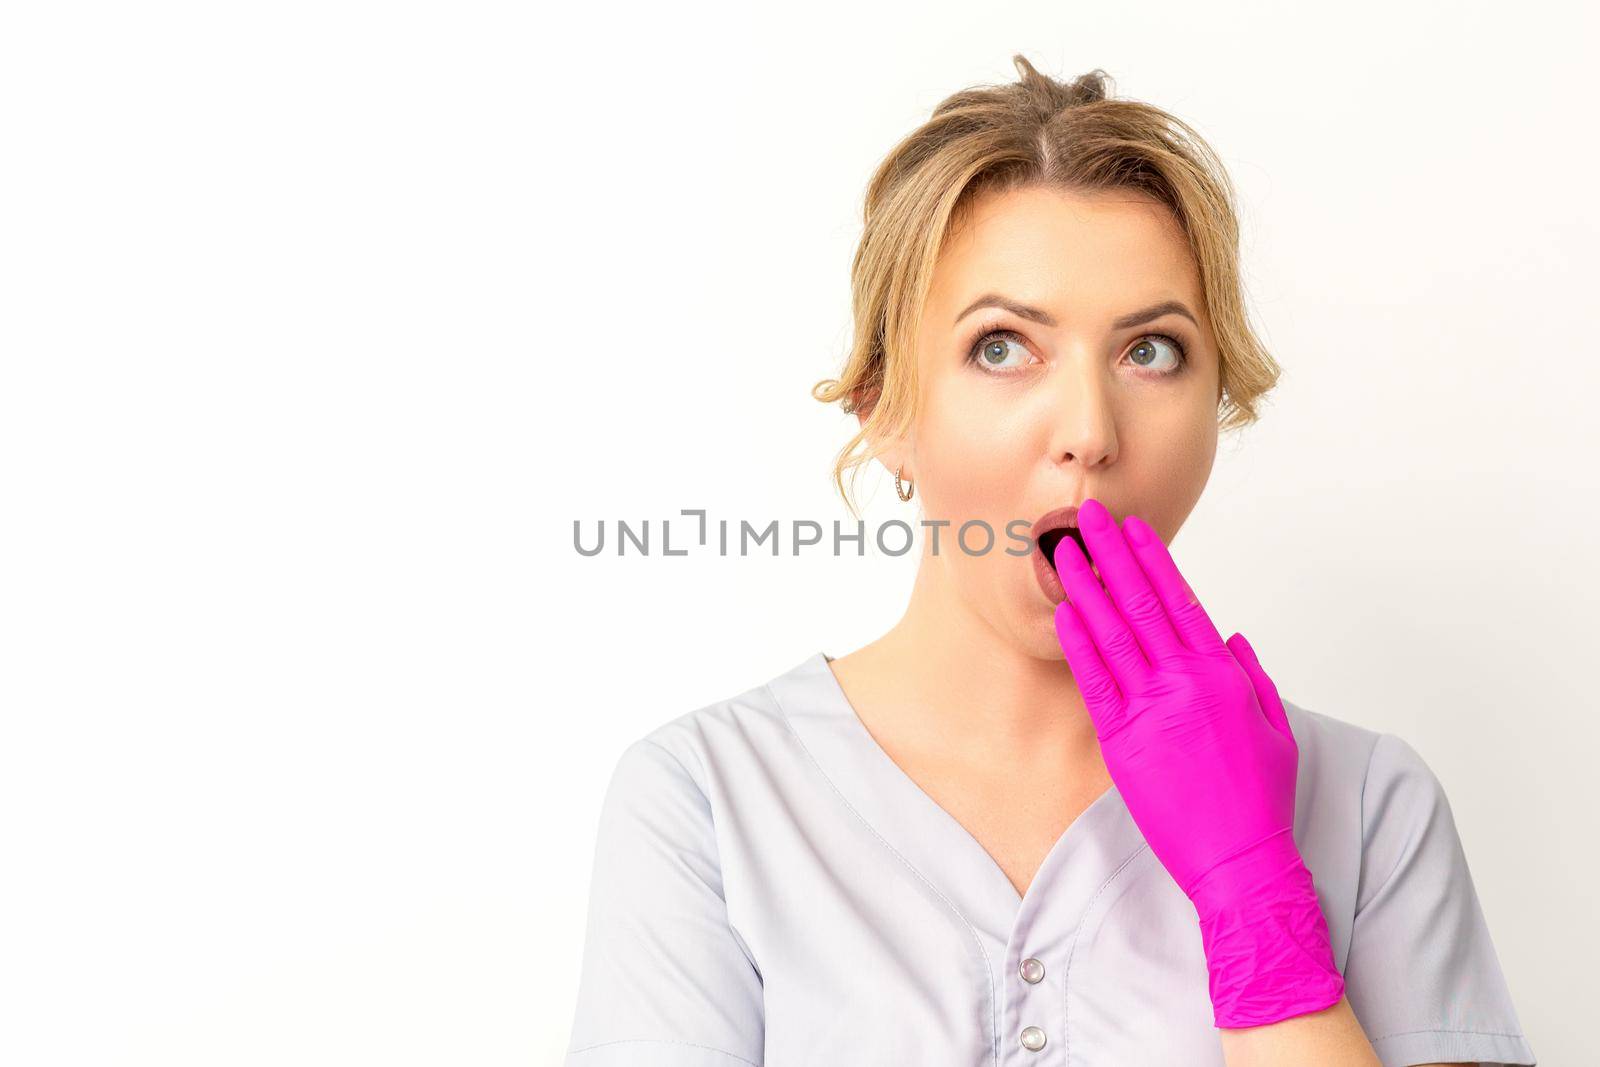 Portrait of a young female caucasian doctor or nurse is shocked covering her mouth with her pink gloved hands against a white background. by okskukuruza